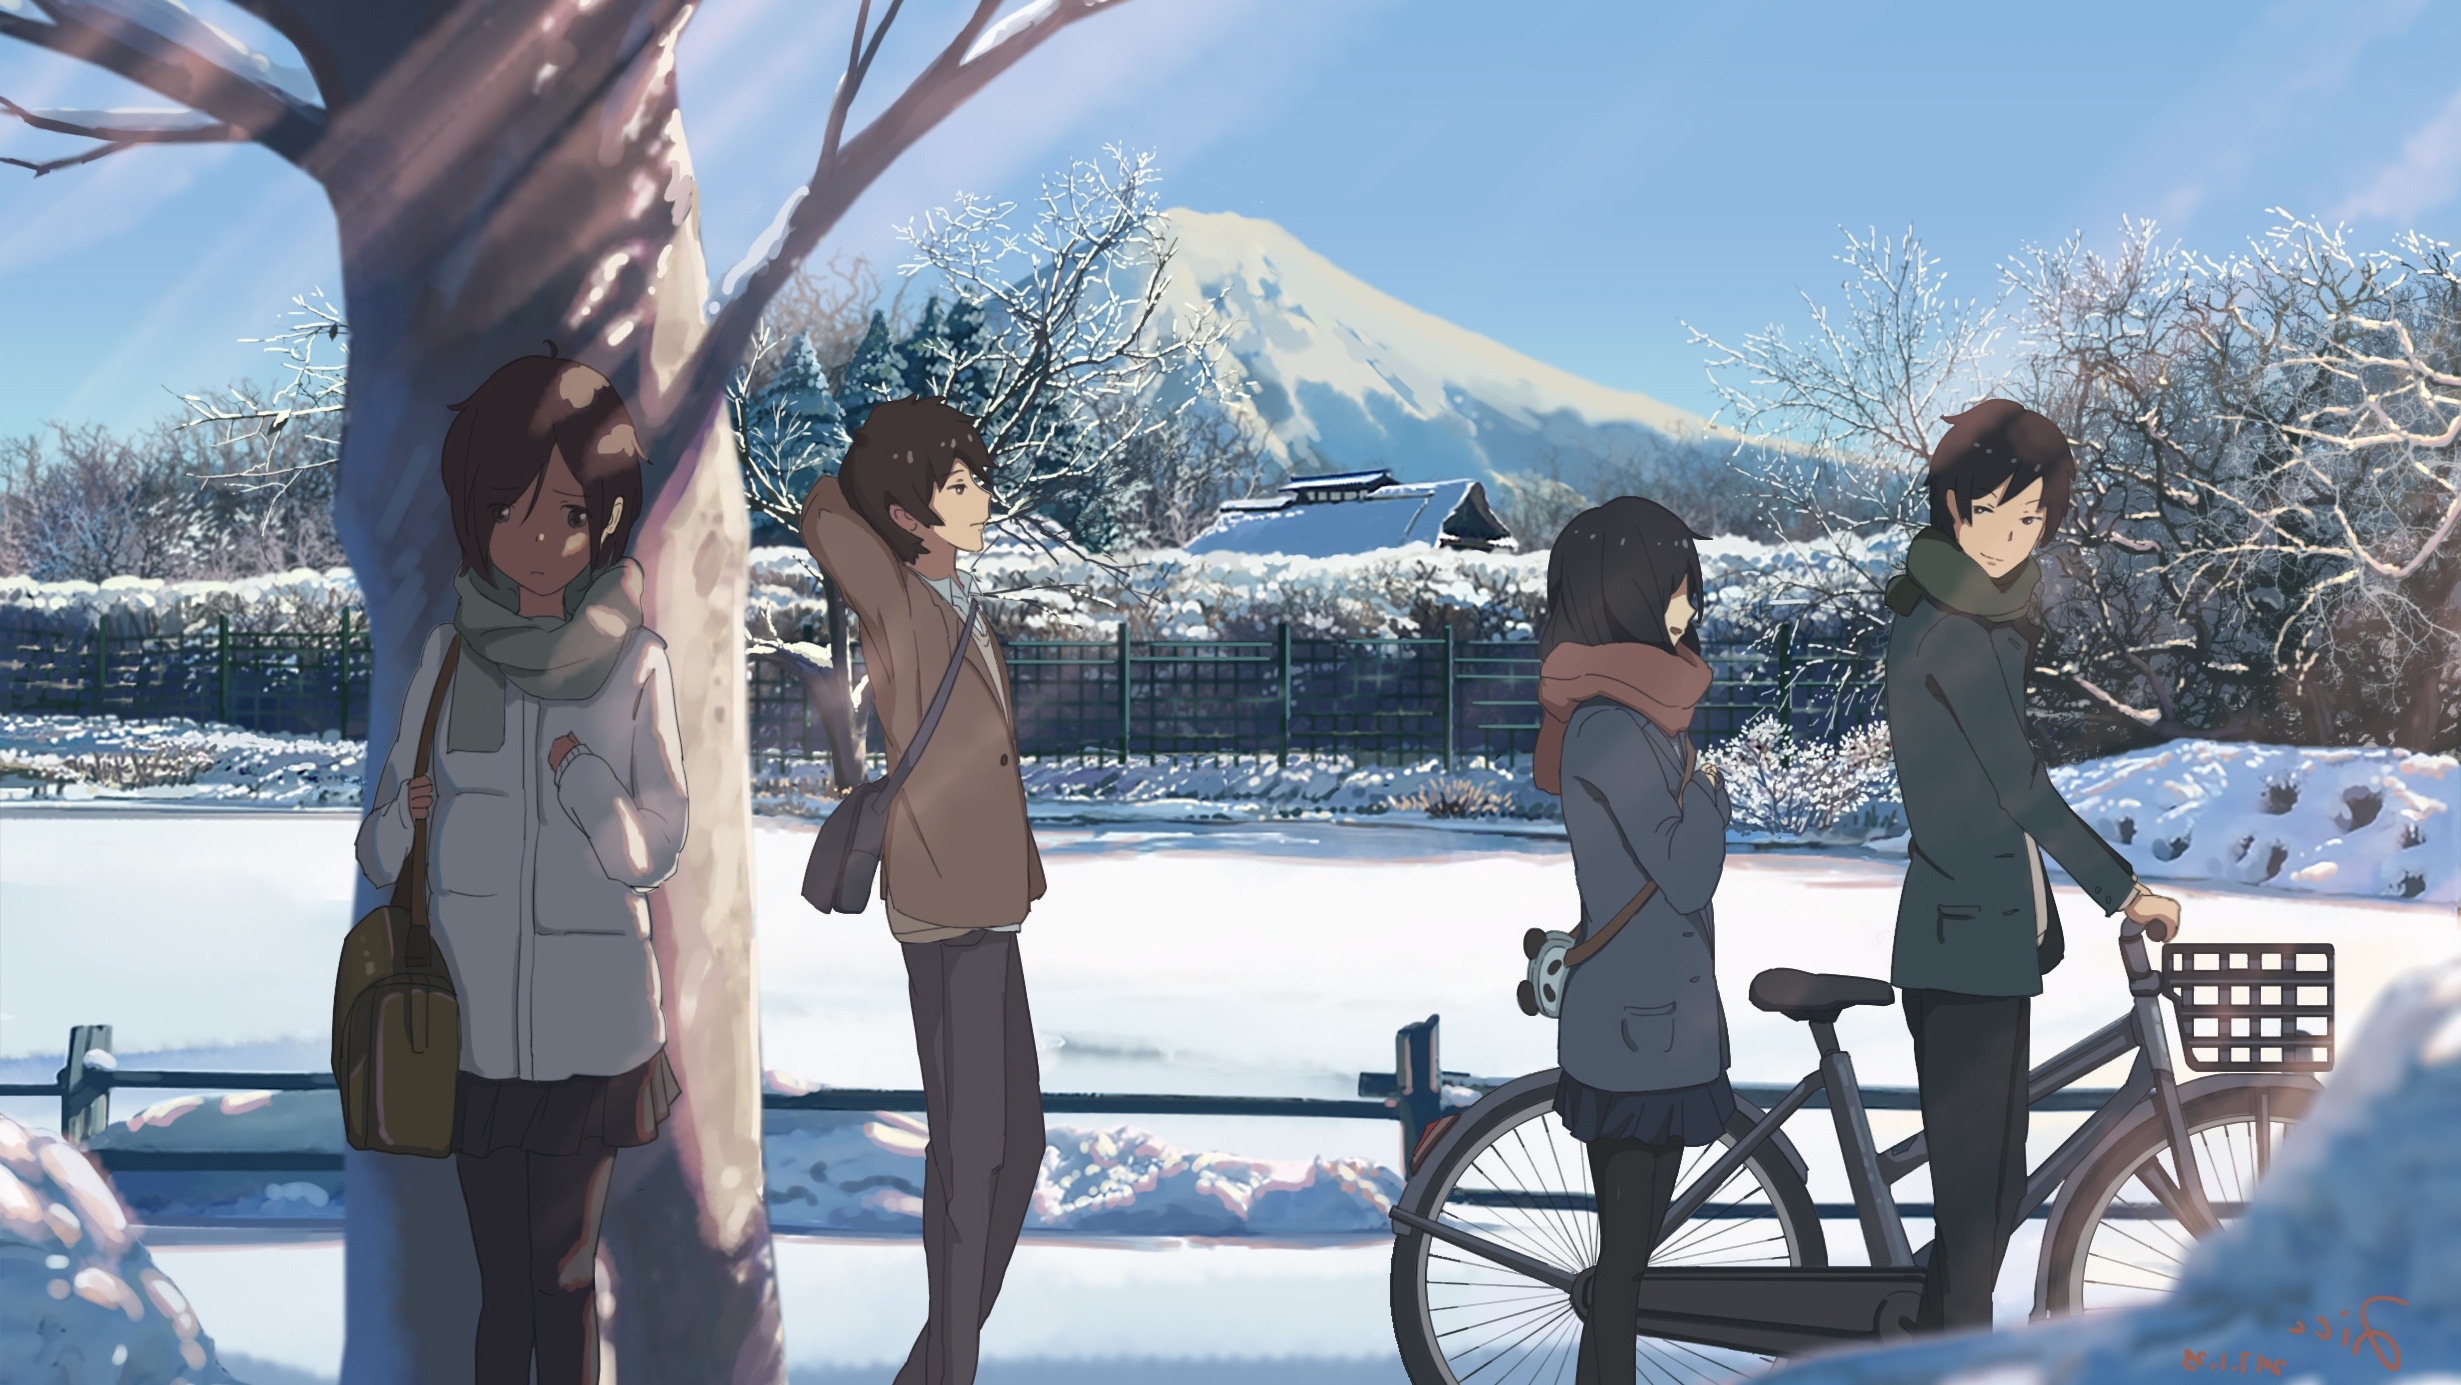 Wallpaper Winter, Anime Boys, Anime Girls, Bicycle, Love Square, Scarf:2461x1385